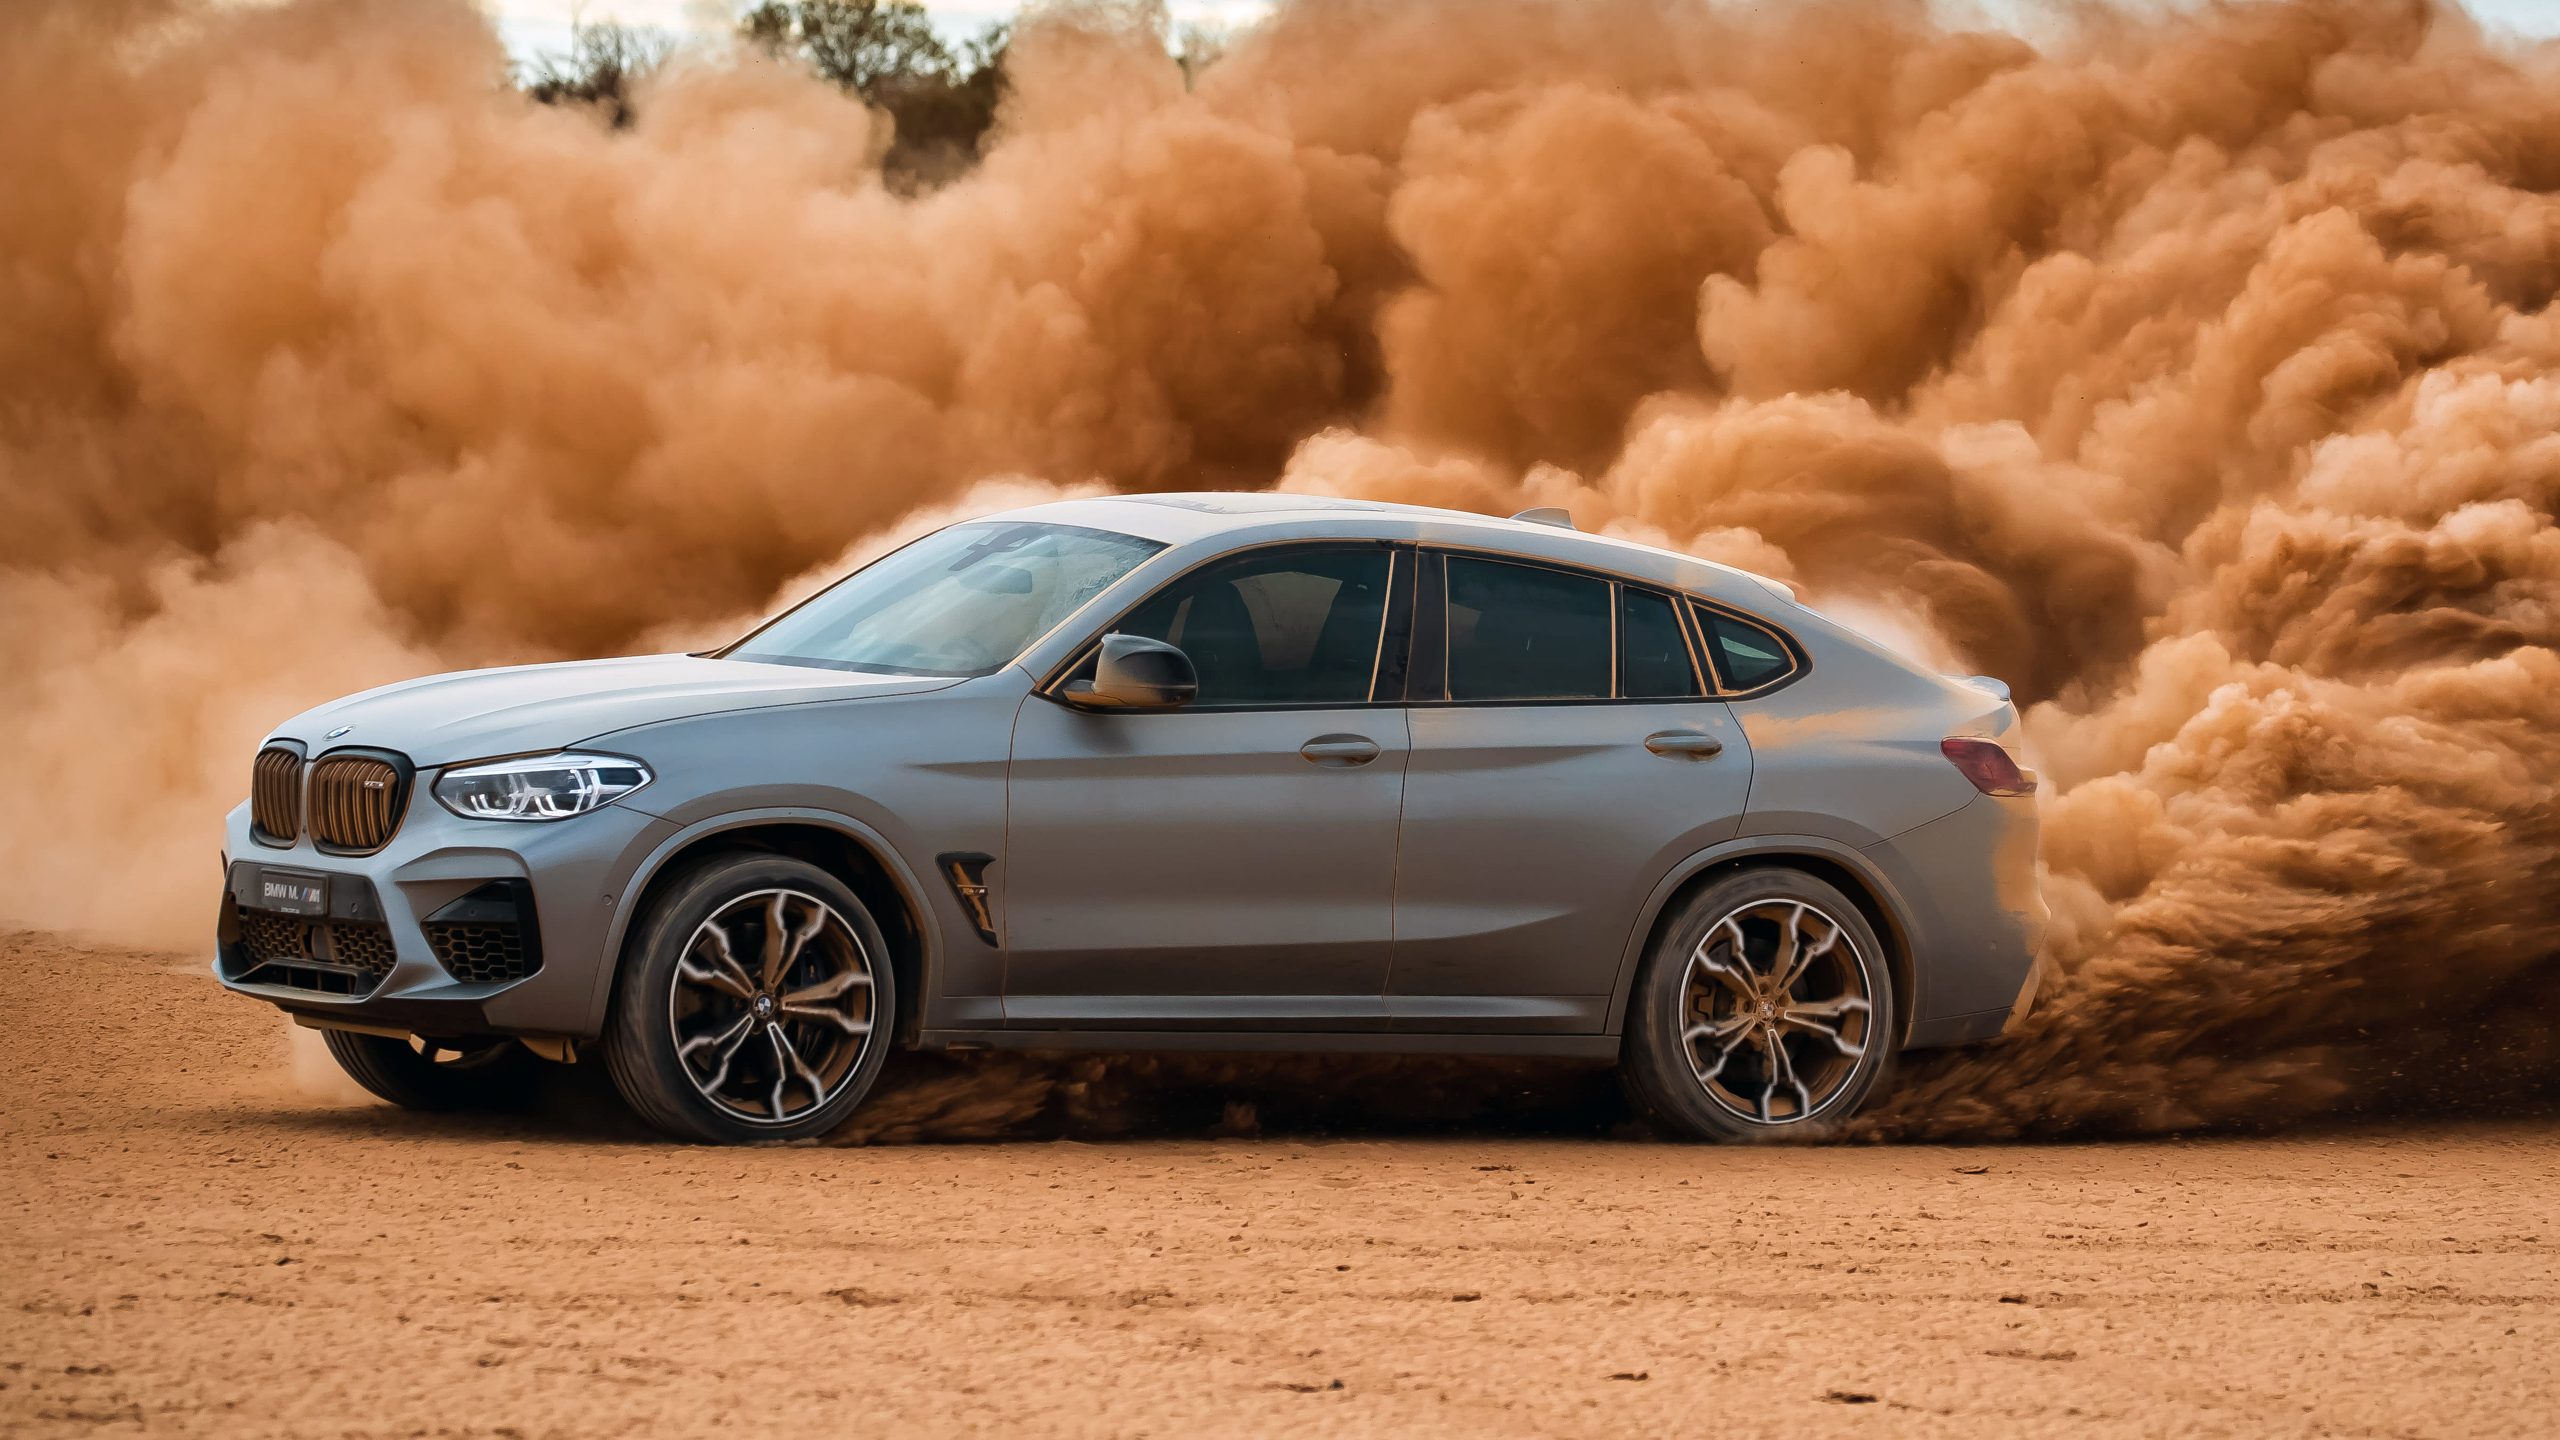 Bmw X4 M Competition 2019 4K Wallpaper | Hd Car Wallpapers in M Bilder